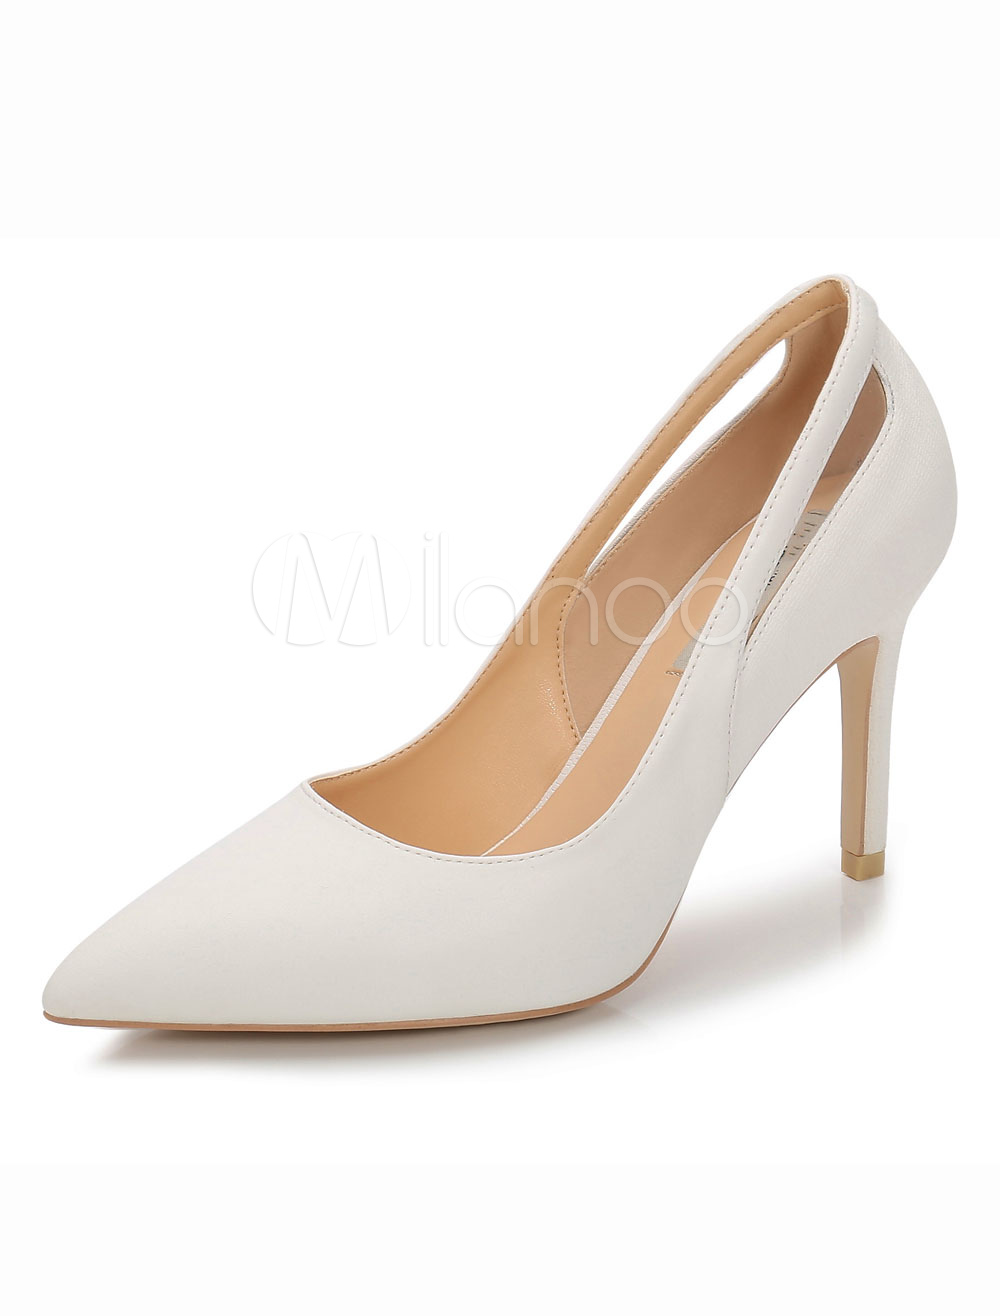 High Heels Women Shoes Pointed Toe Cut 